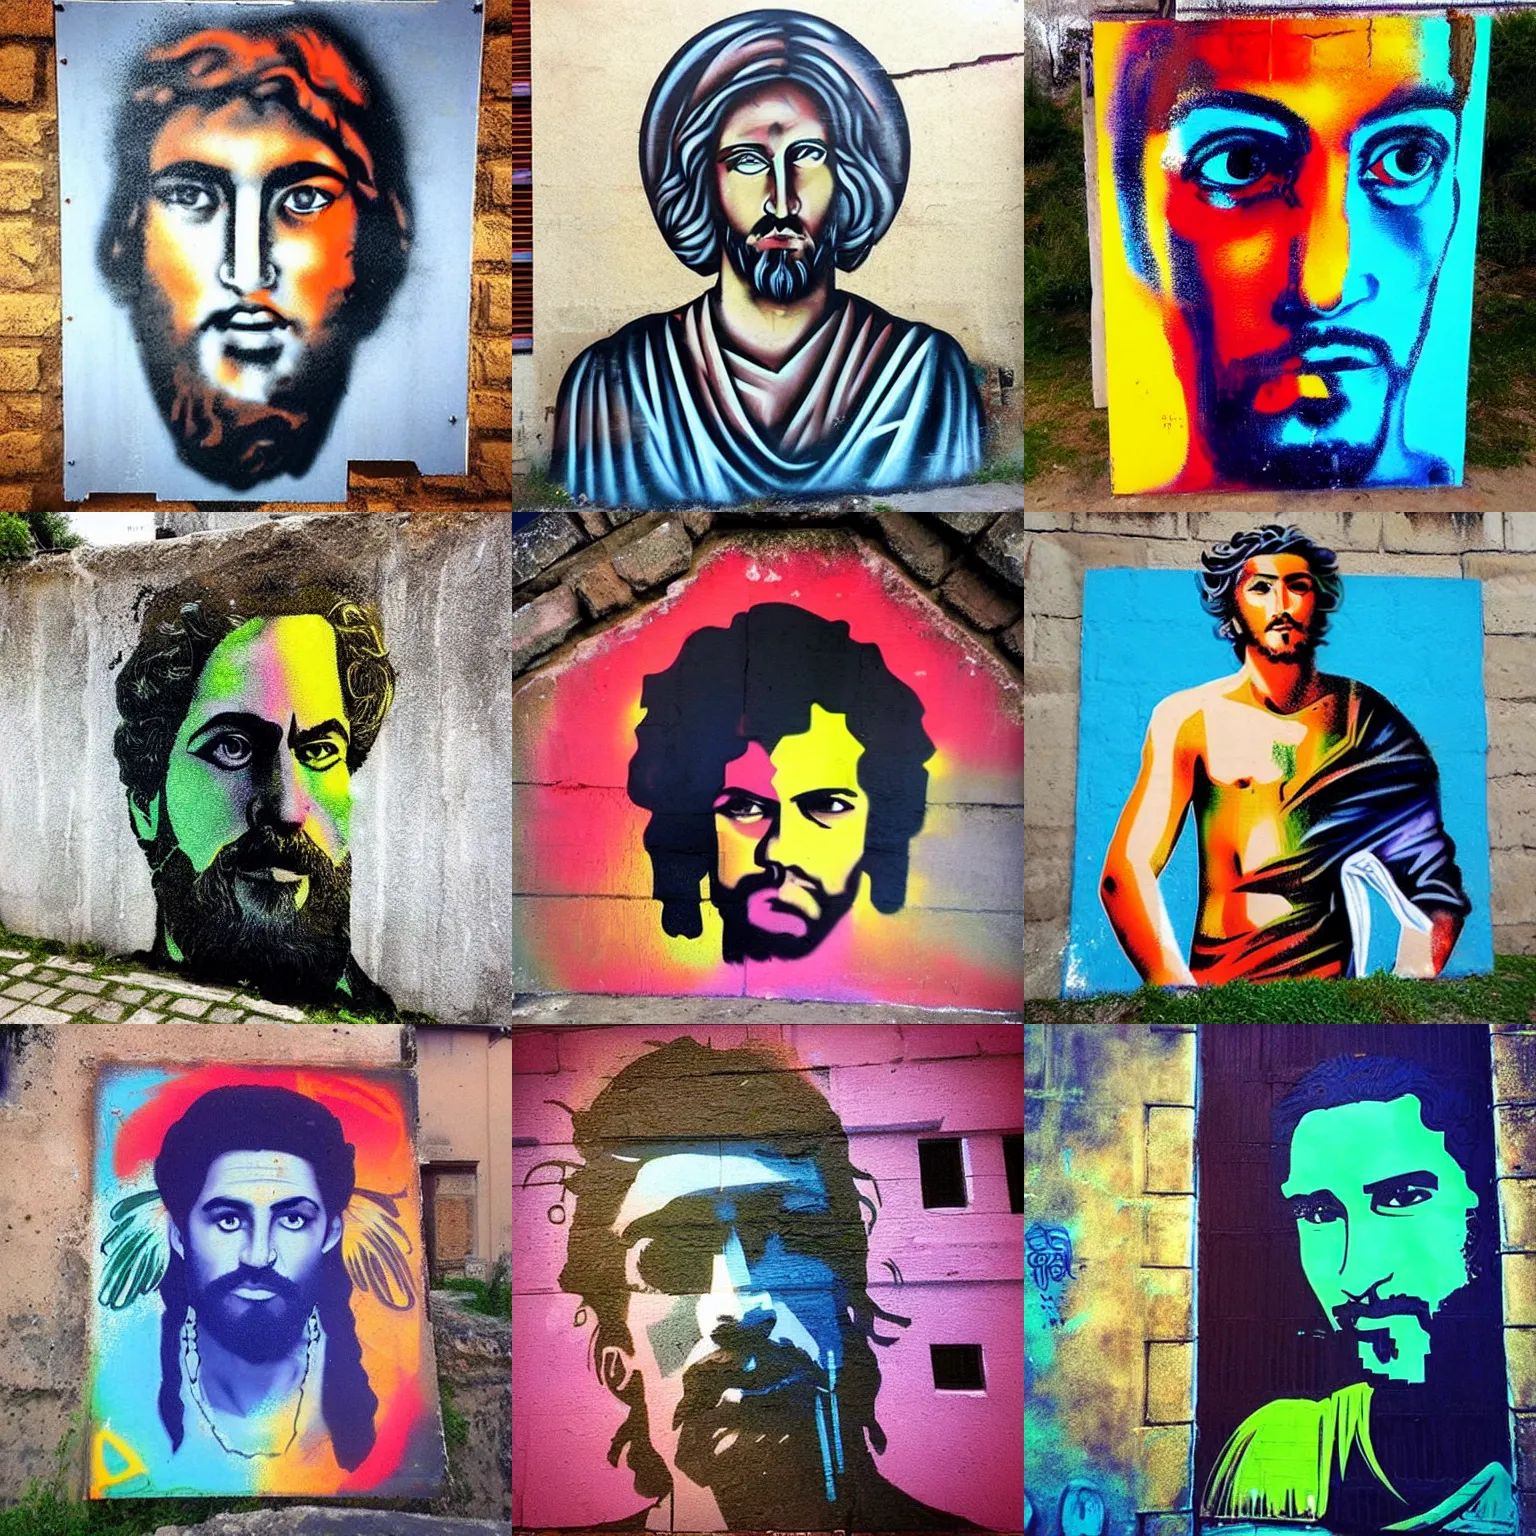 Prompt: “Spray paint stencil portrait of a Greek God on the city wall, colorful, but very good looking”